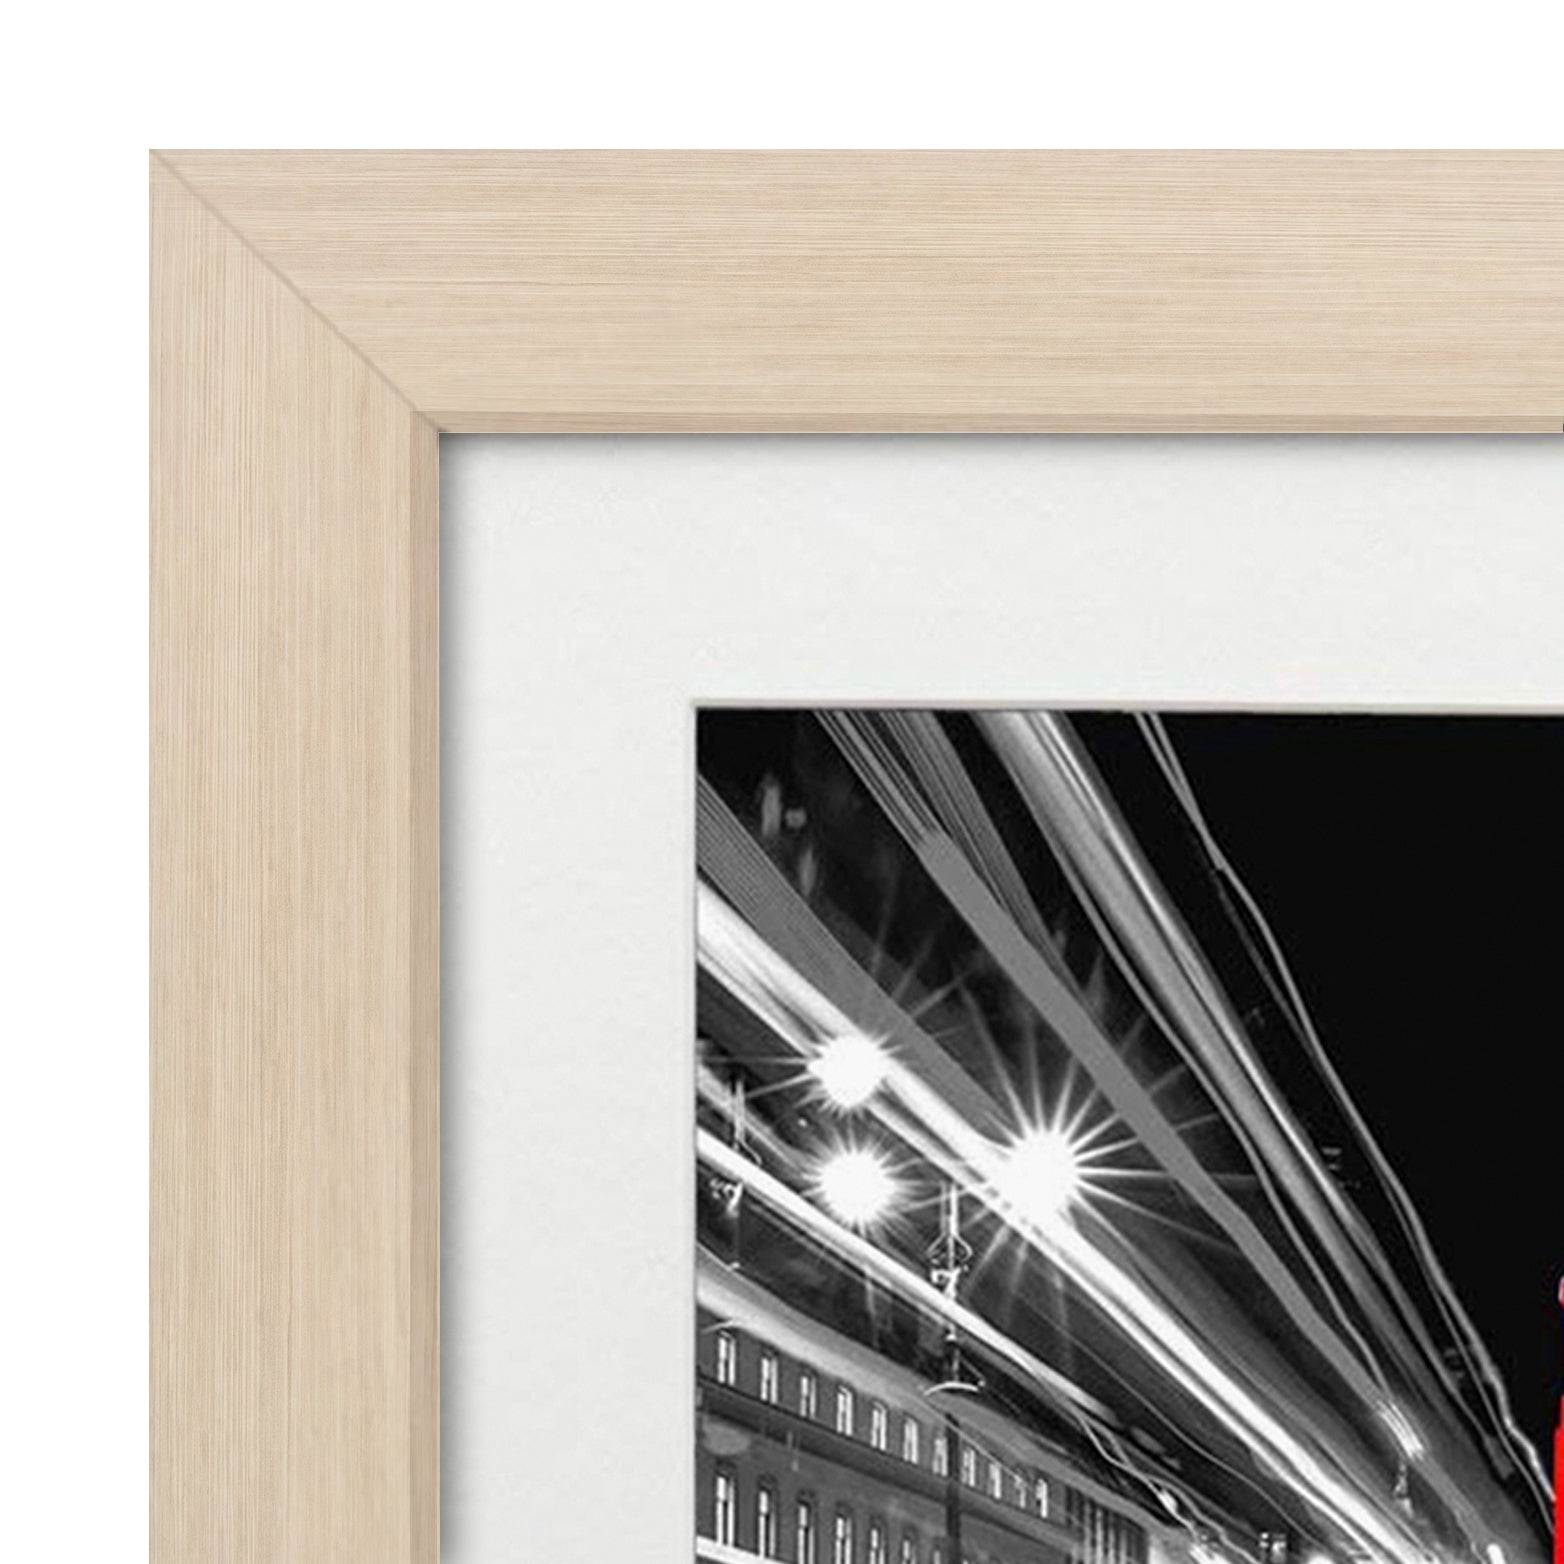 Americanflat 11x14 Light Wood Picture Frame 2 Pack with Shatter-Resistant Glass Cover and Composite Wood Molding - 11x14 Frame with Mat for 8x10